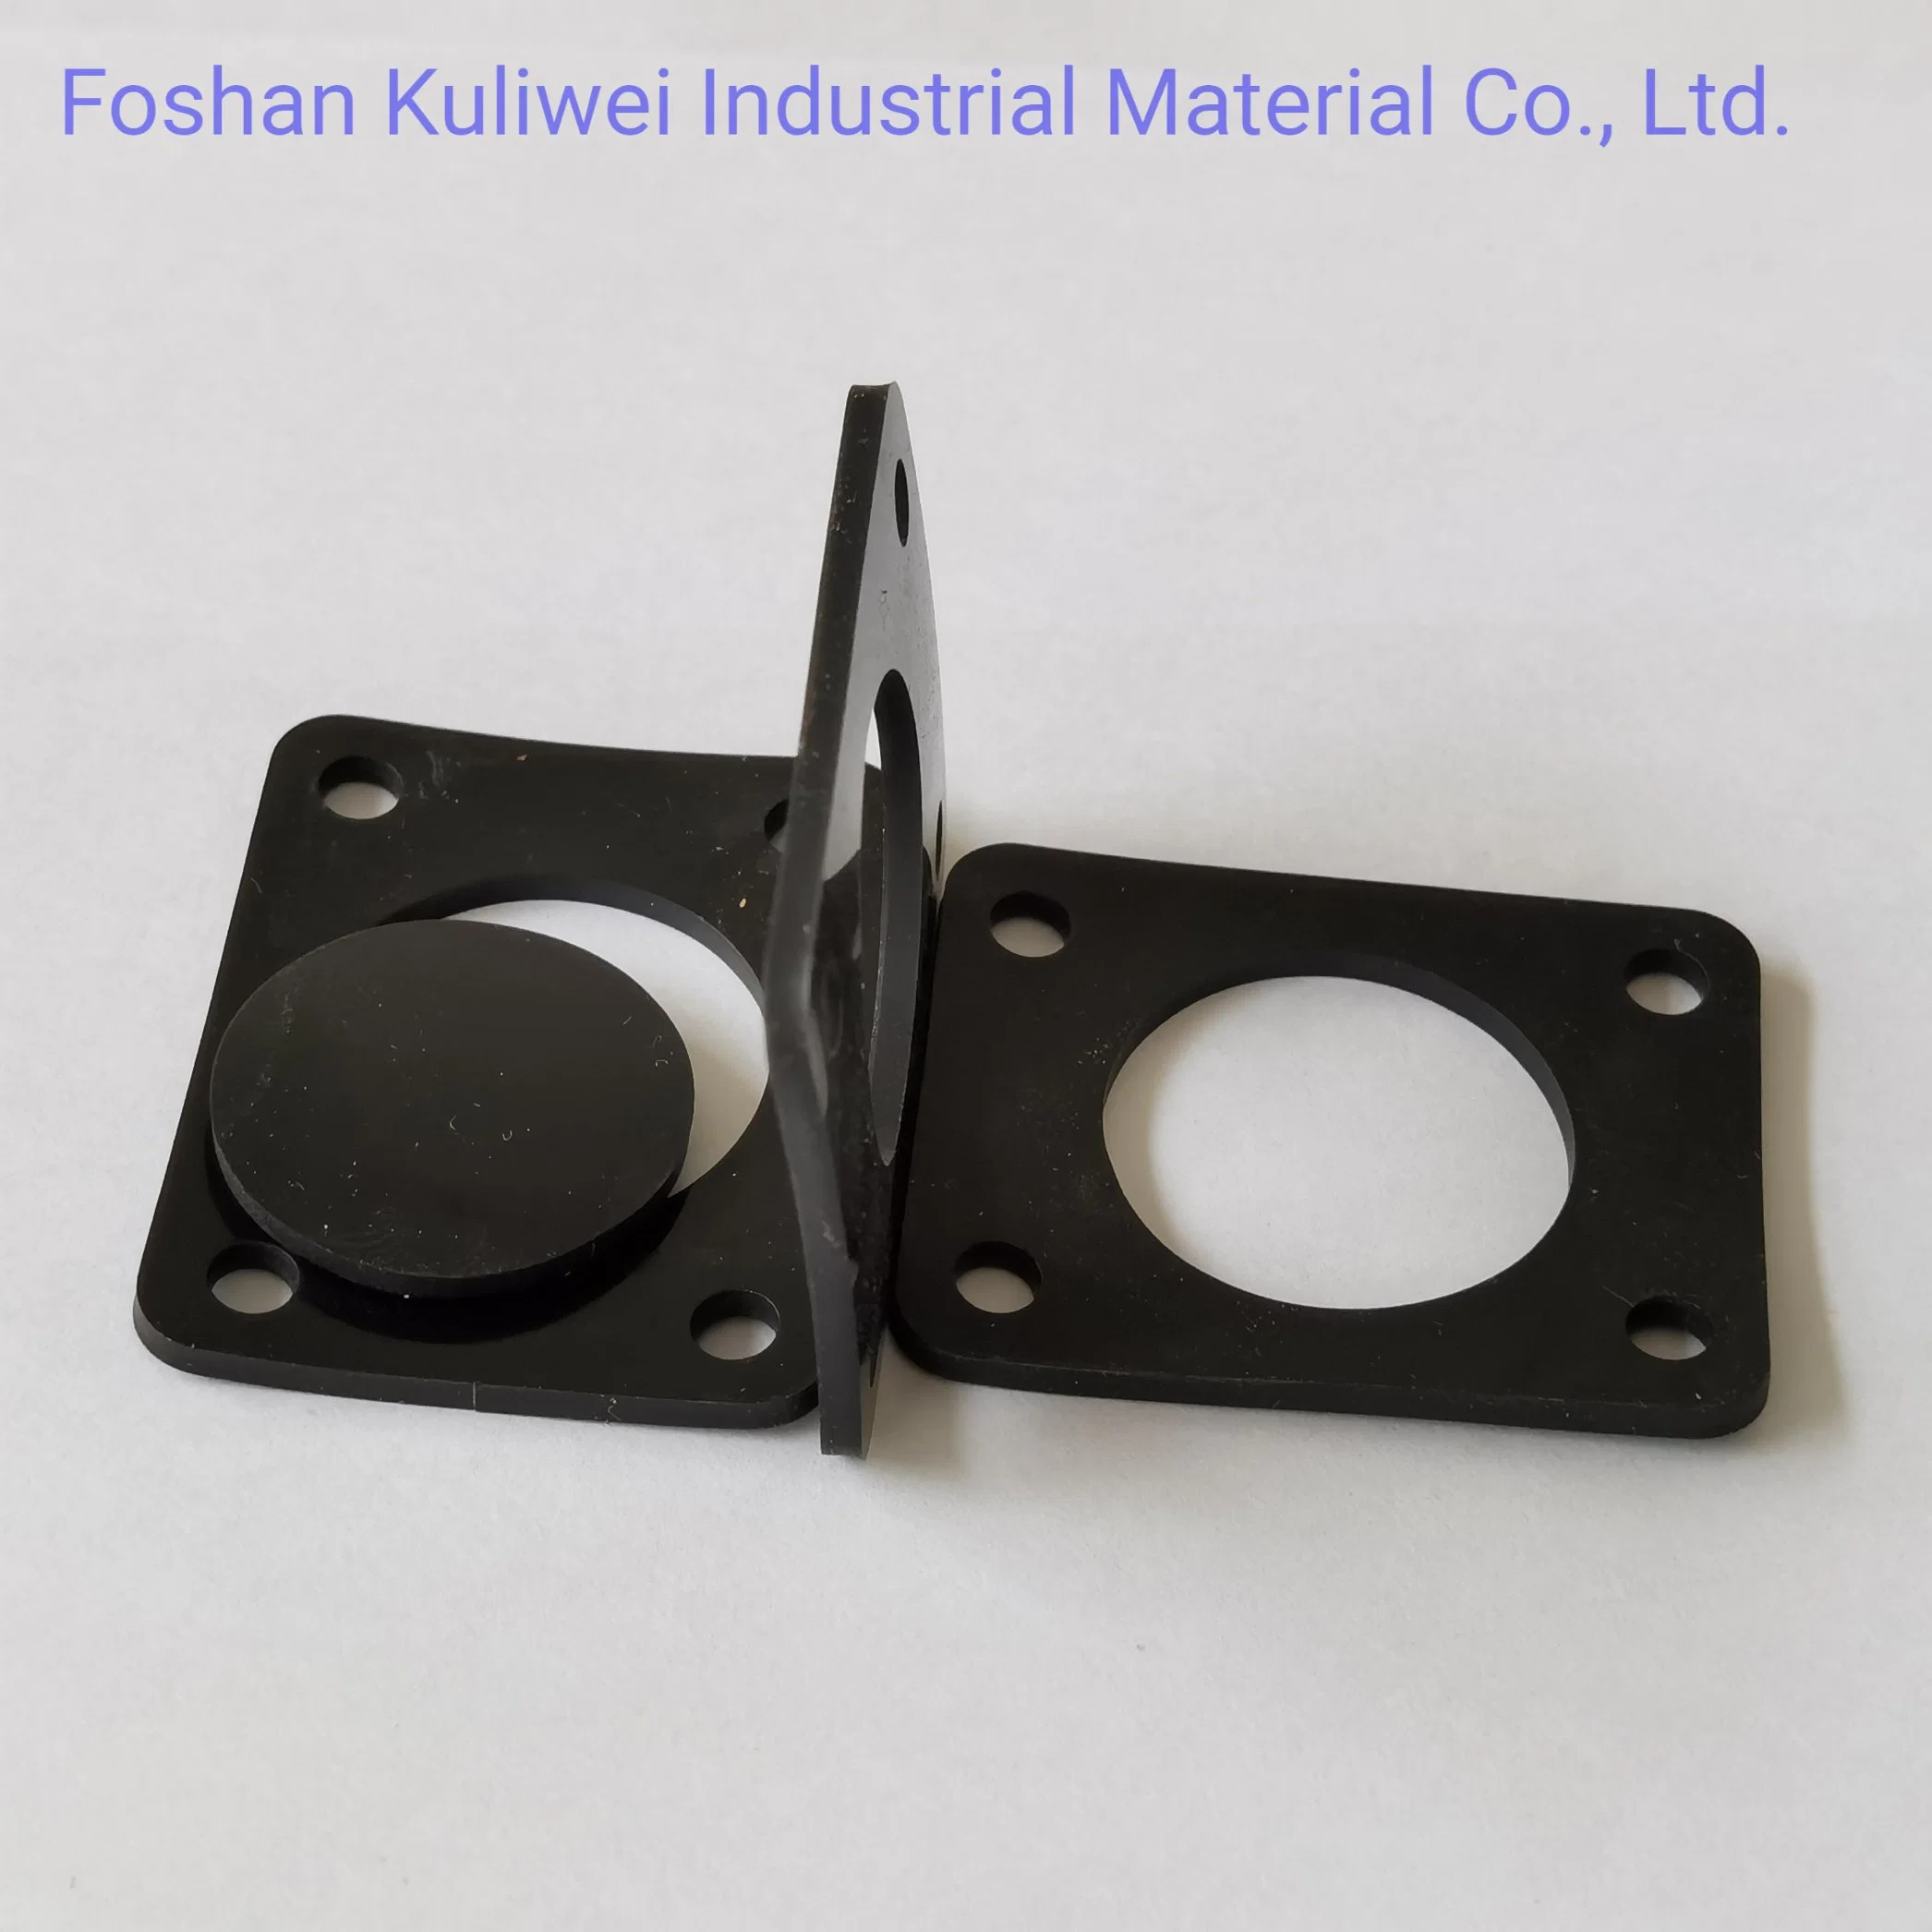 Customized OEM/ODM Industry Bonded Acm/Cr/EPDM/FDA Silicone Rubber Spiral Wound Sheet Sealing Gasket Silicone EPDM NBR FKM CR Rubber Bellow Flat Sealing Washer